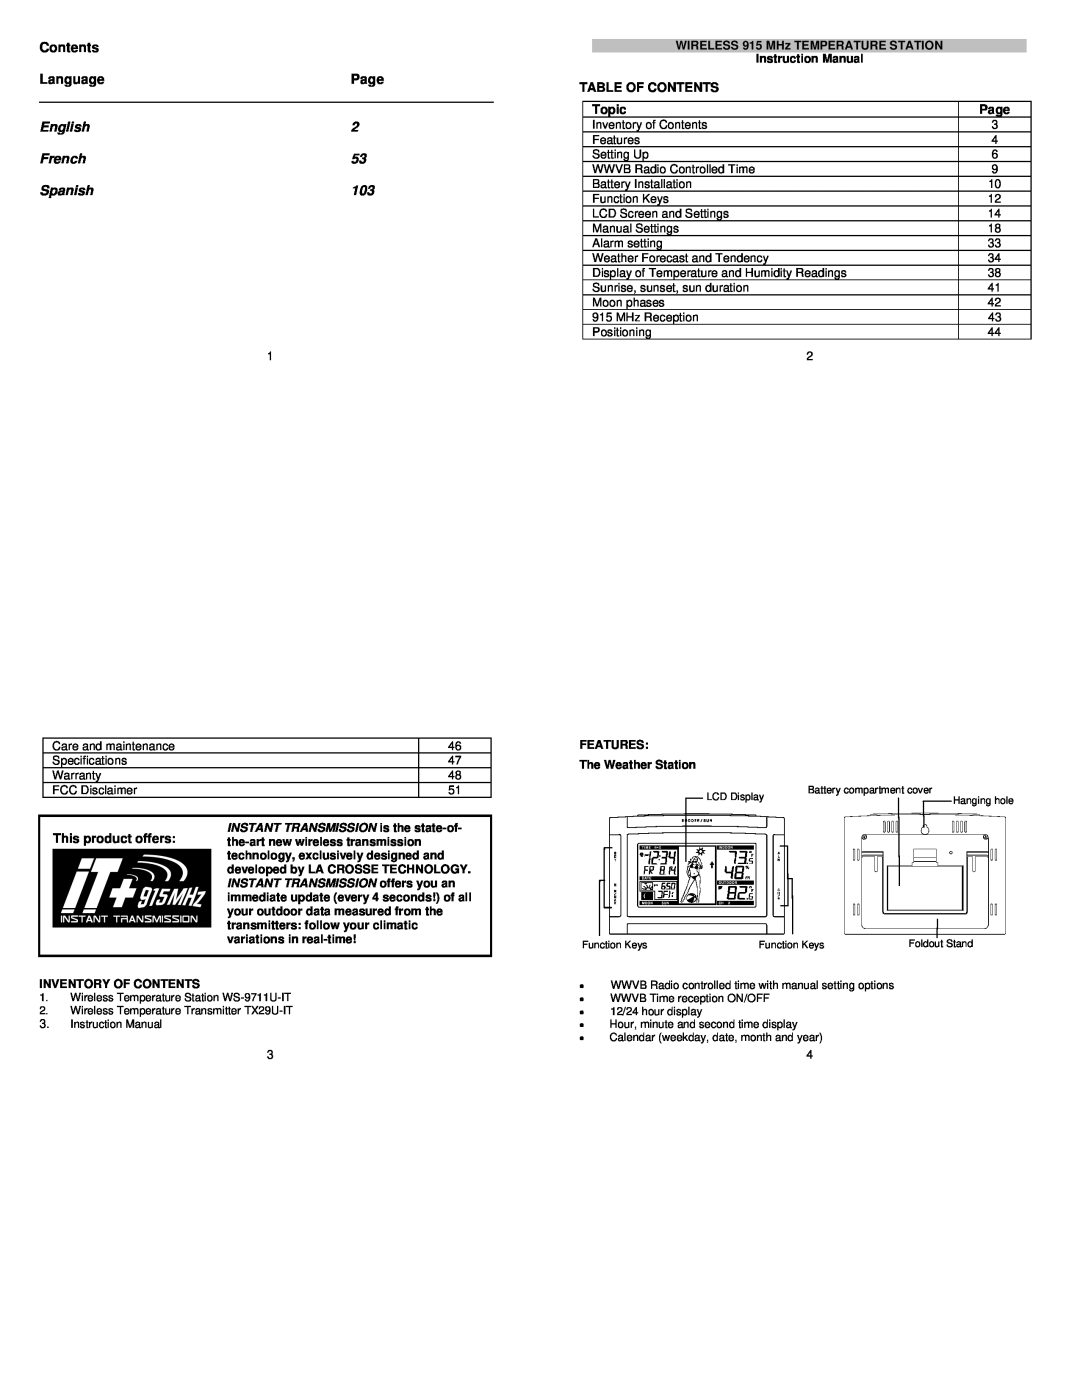 La Crosse Technology WS-9711U-IT instruction manual Language, Page, Table Of Contents, Topic, Inventory Of Contents 